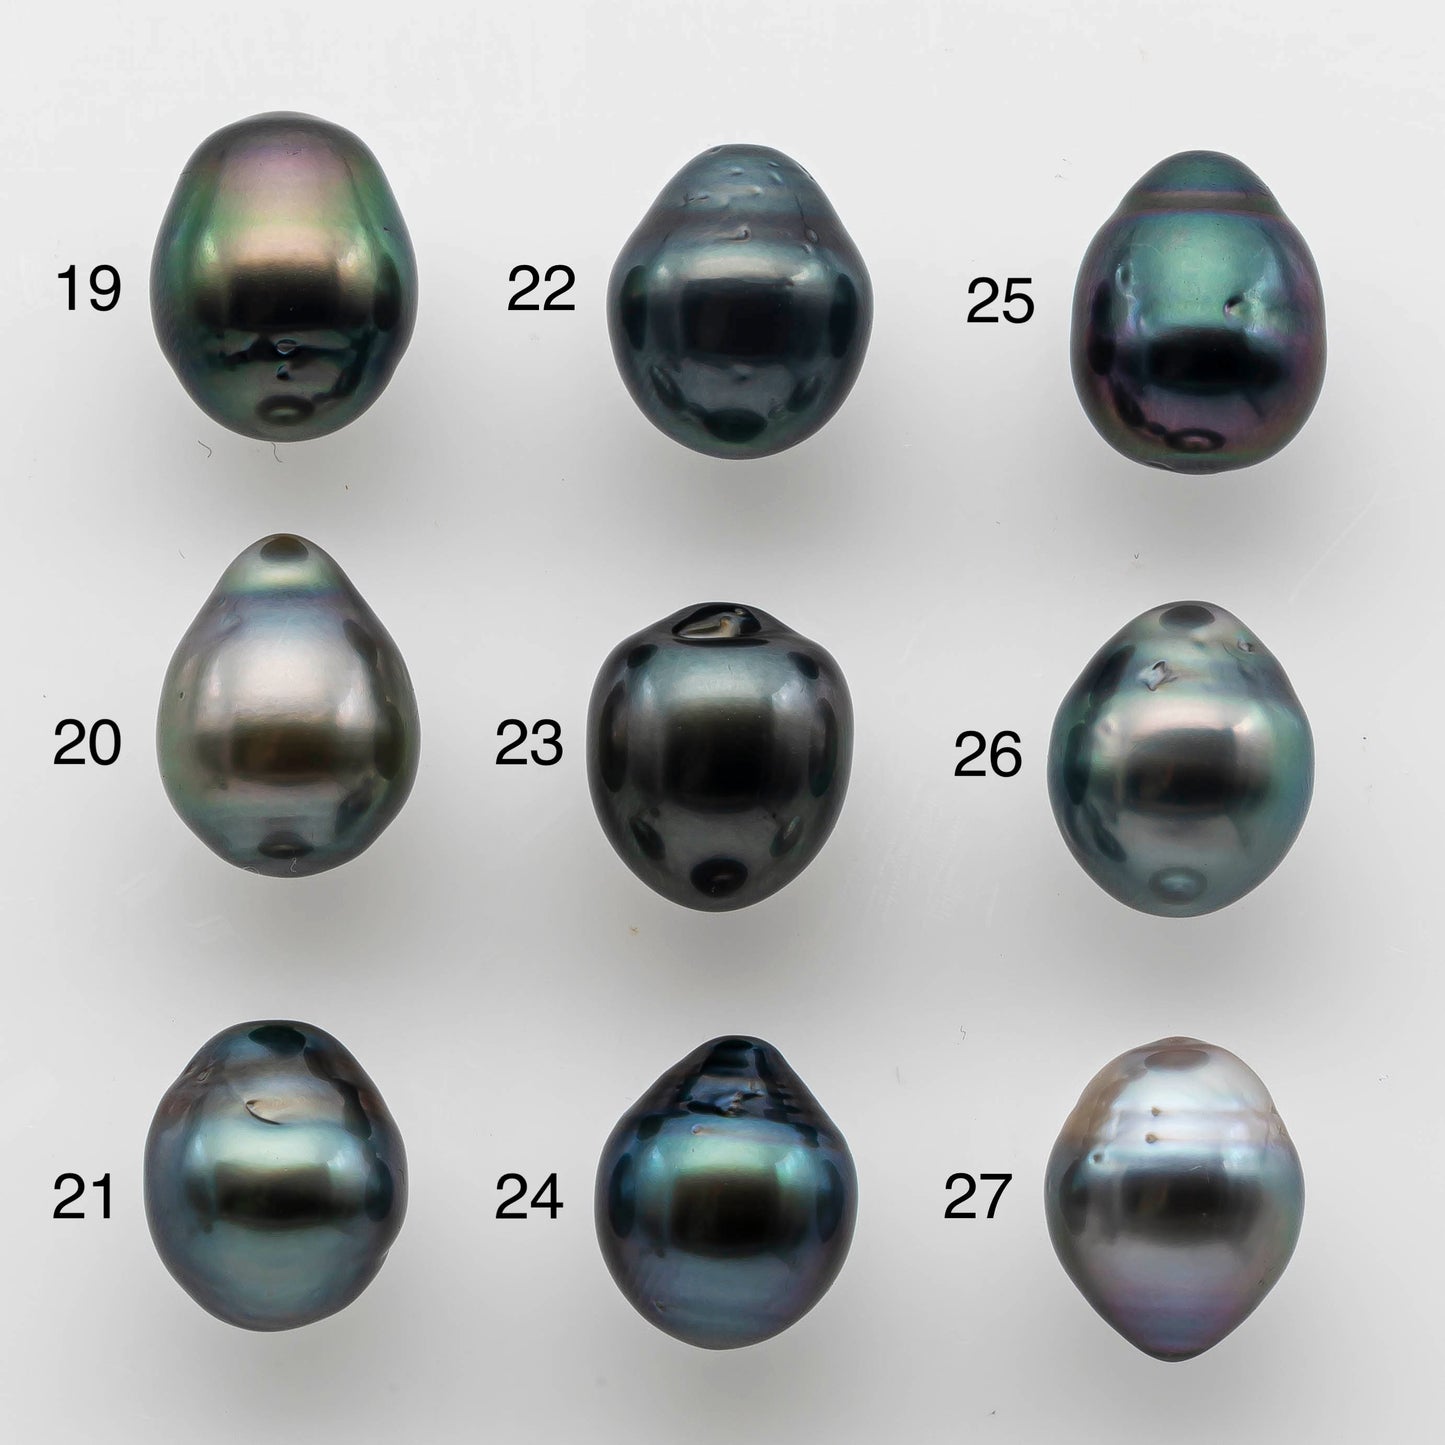 9-10mm Single Tahitian Pearl Teardrop Loose Undrilled Piece in High Luster and Natural Color with Blemishes, SKU #1476TH